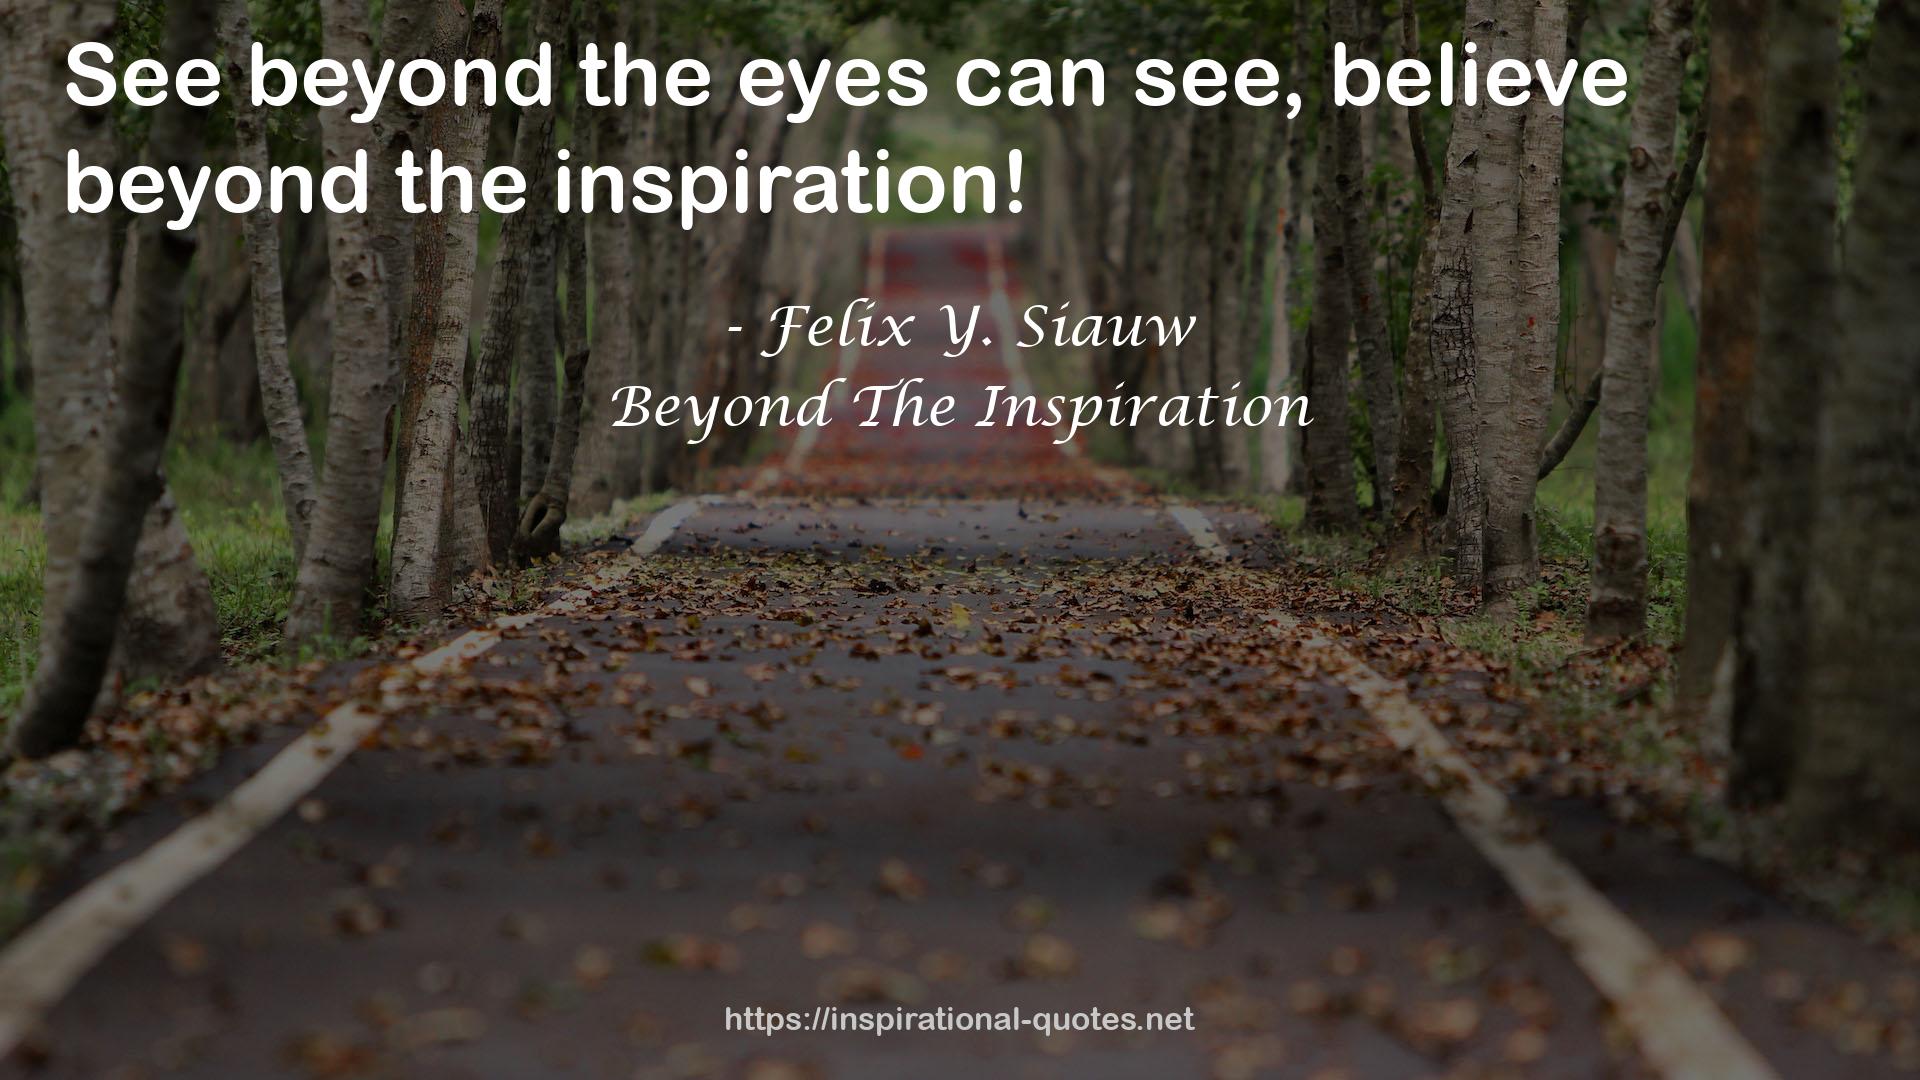 Beyond The Inspiration QUOTES